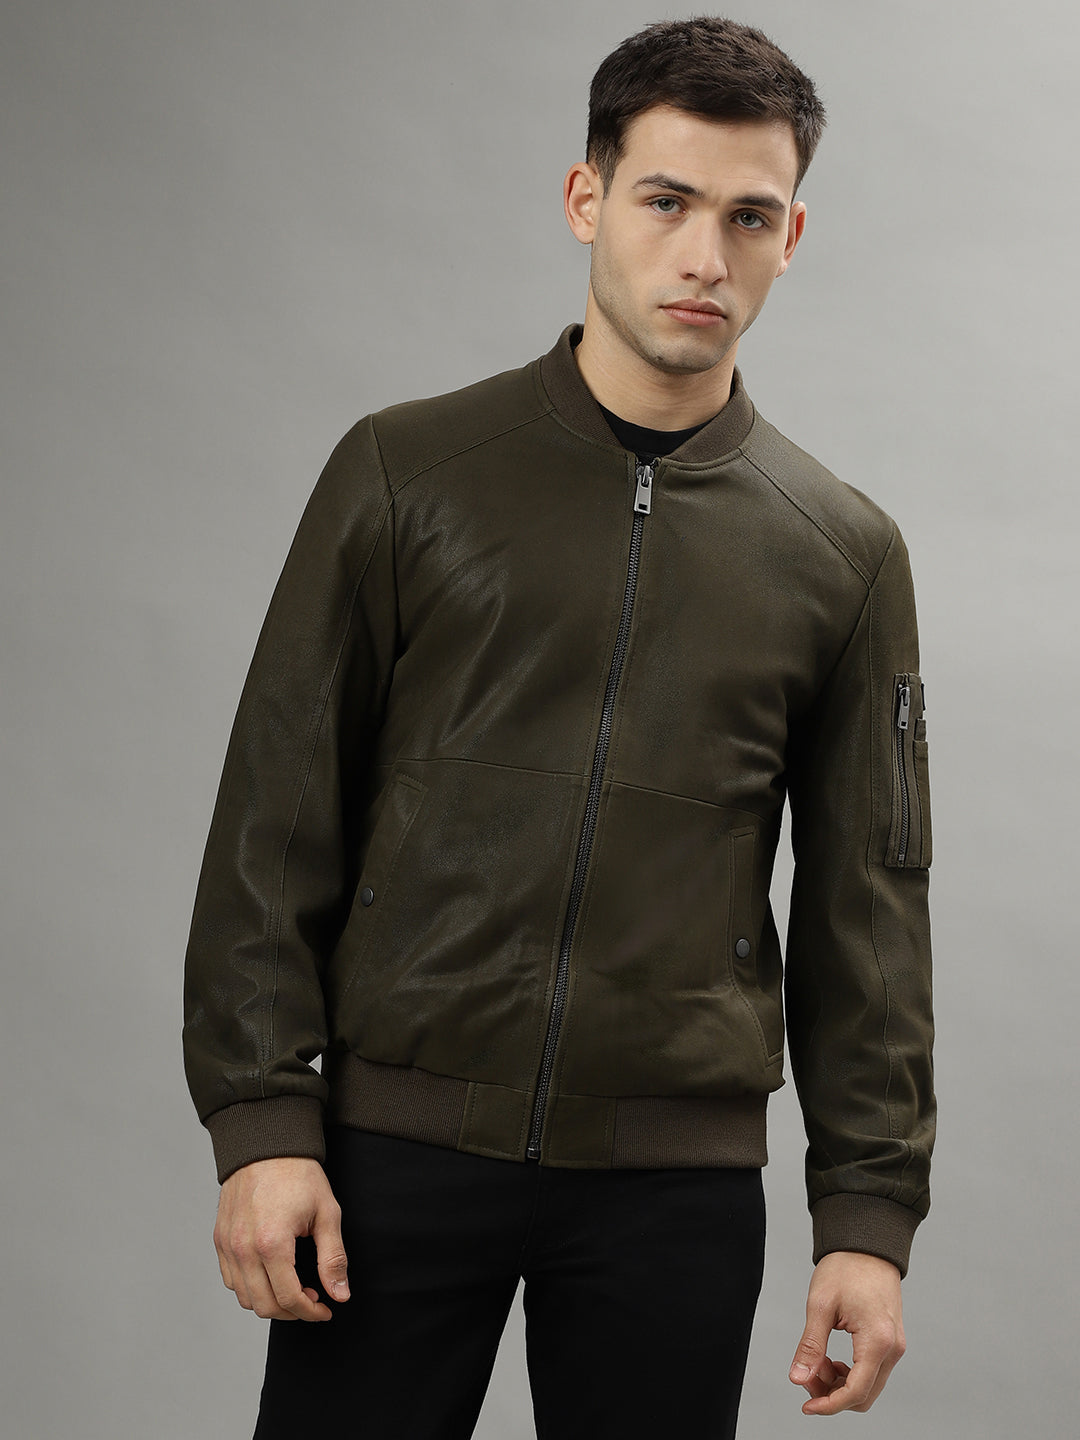 Mens Reece Black Bomber Leather Jacket with Fur Collar - NYC Leather Jackets